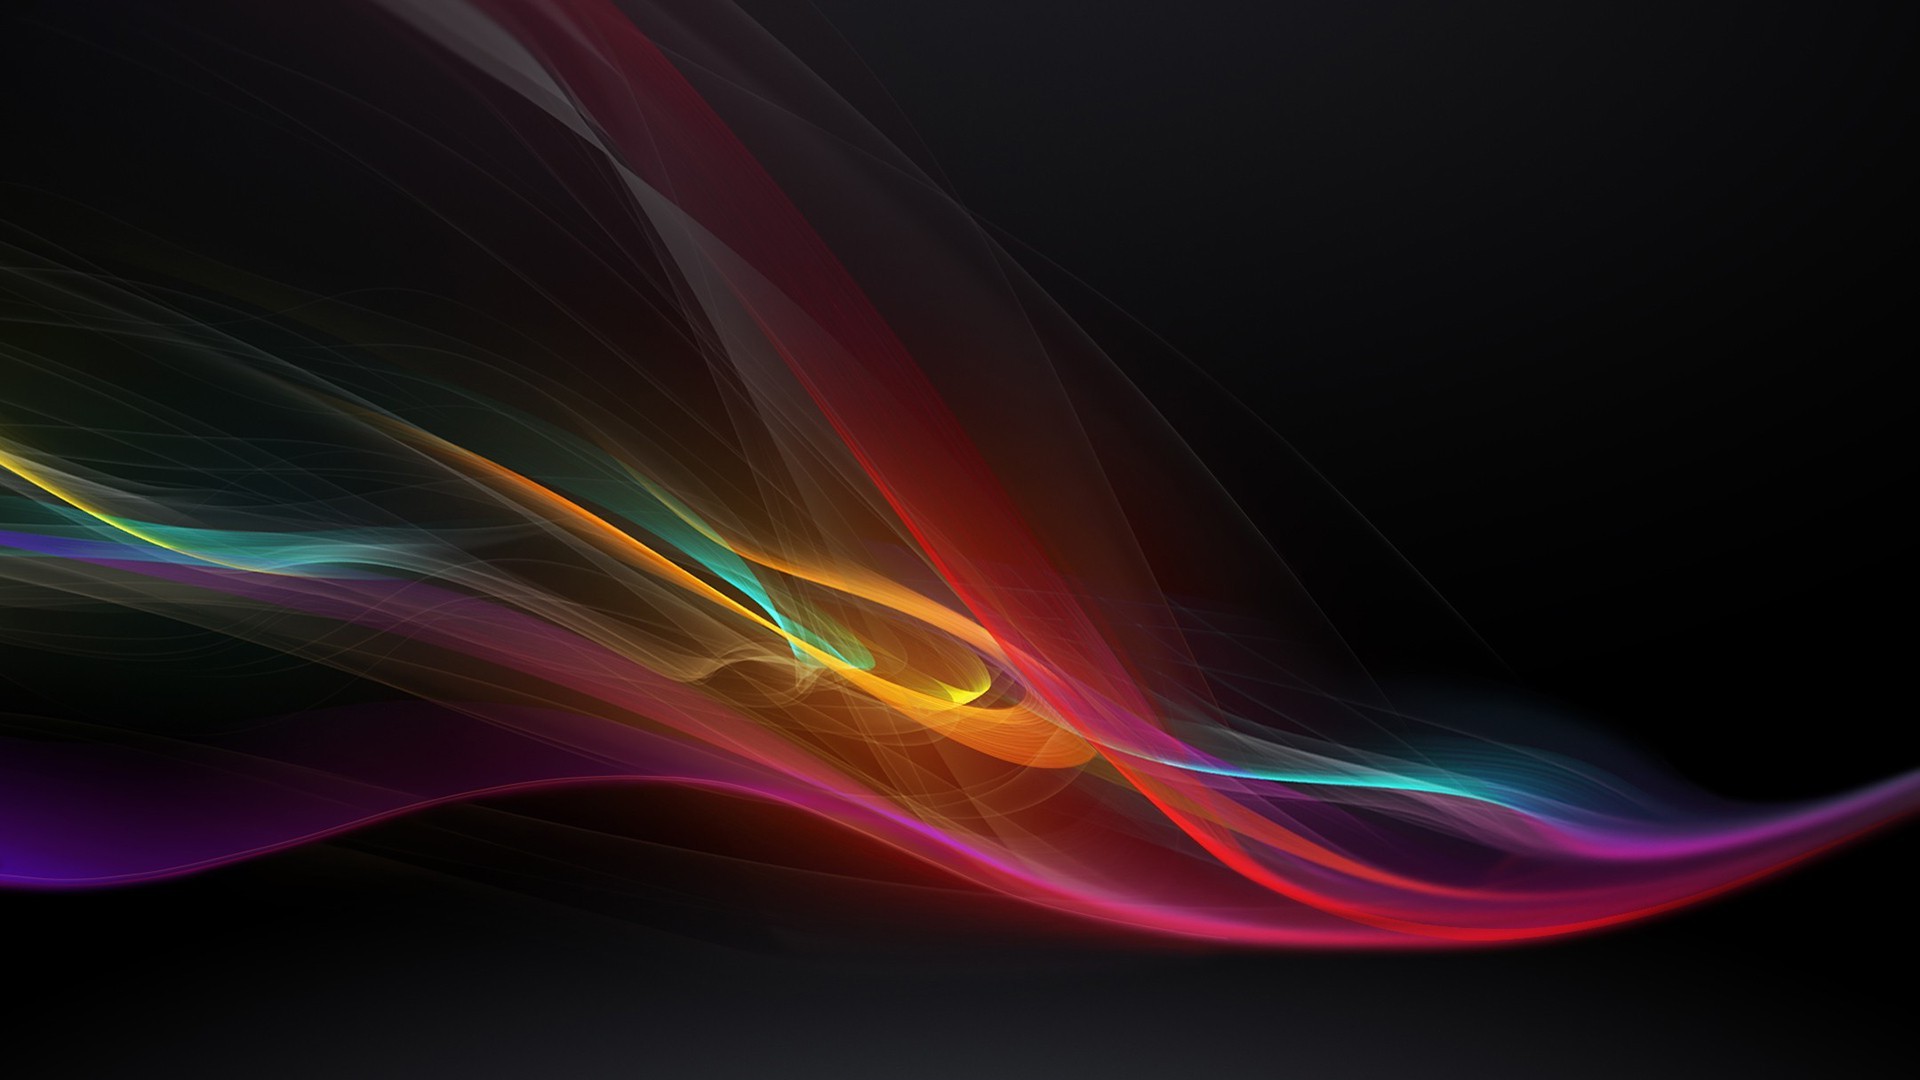 Abstract Photography Wallpaper